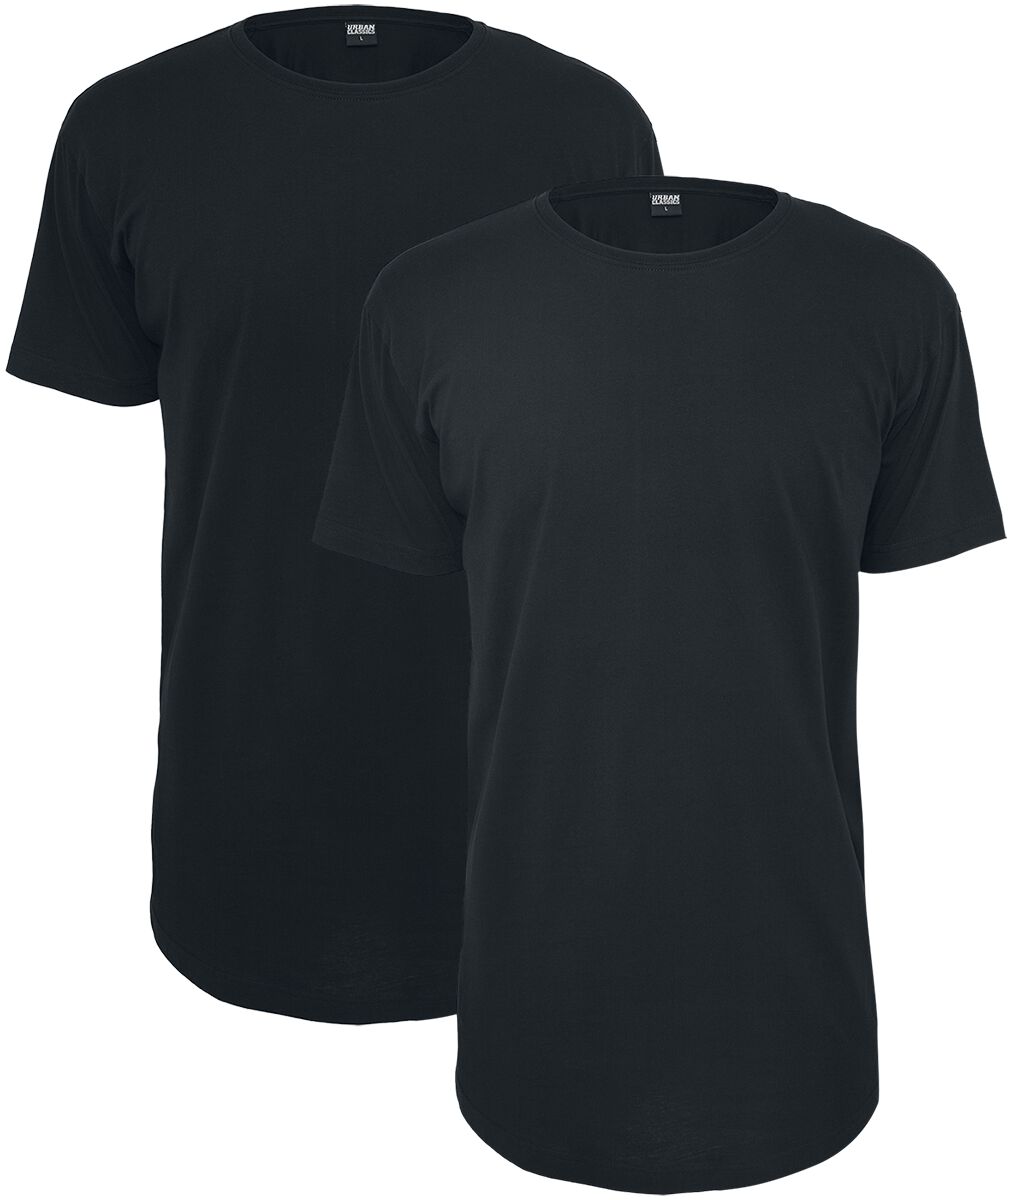 Urban Classics Pre-Pack Shaped Long Tee 2-Pack T-Shirt schwarz in S